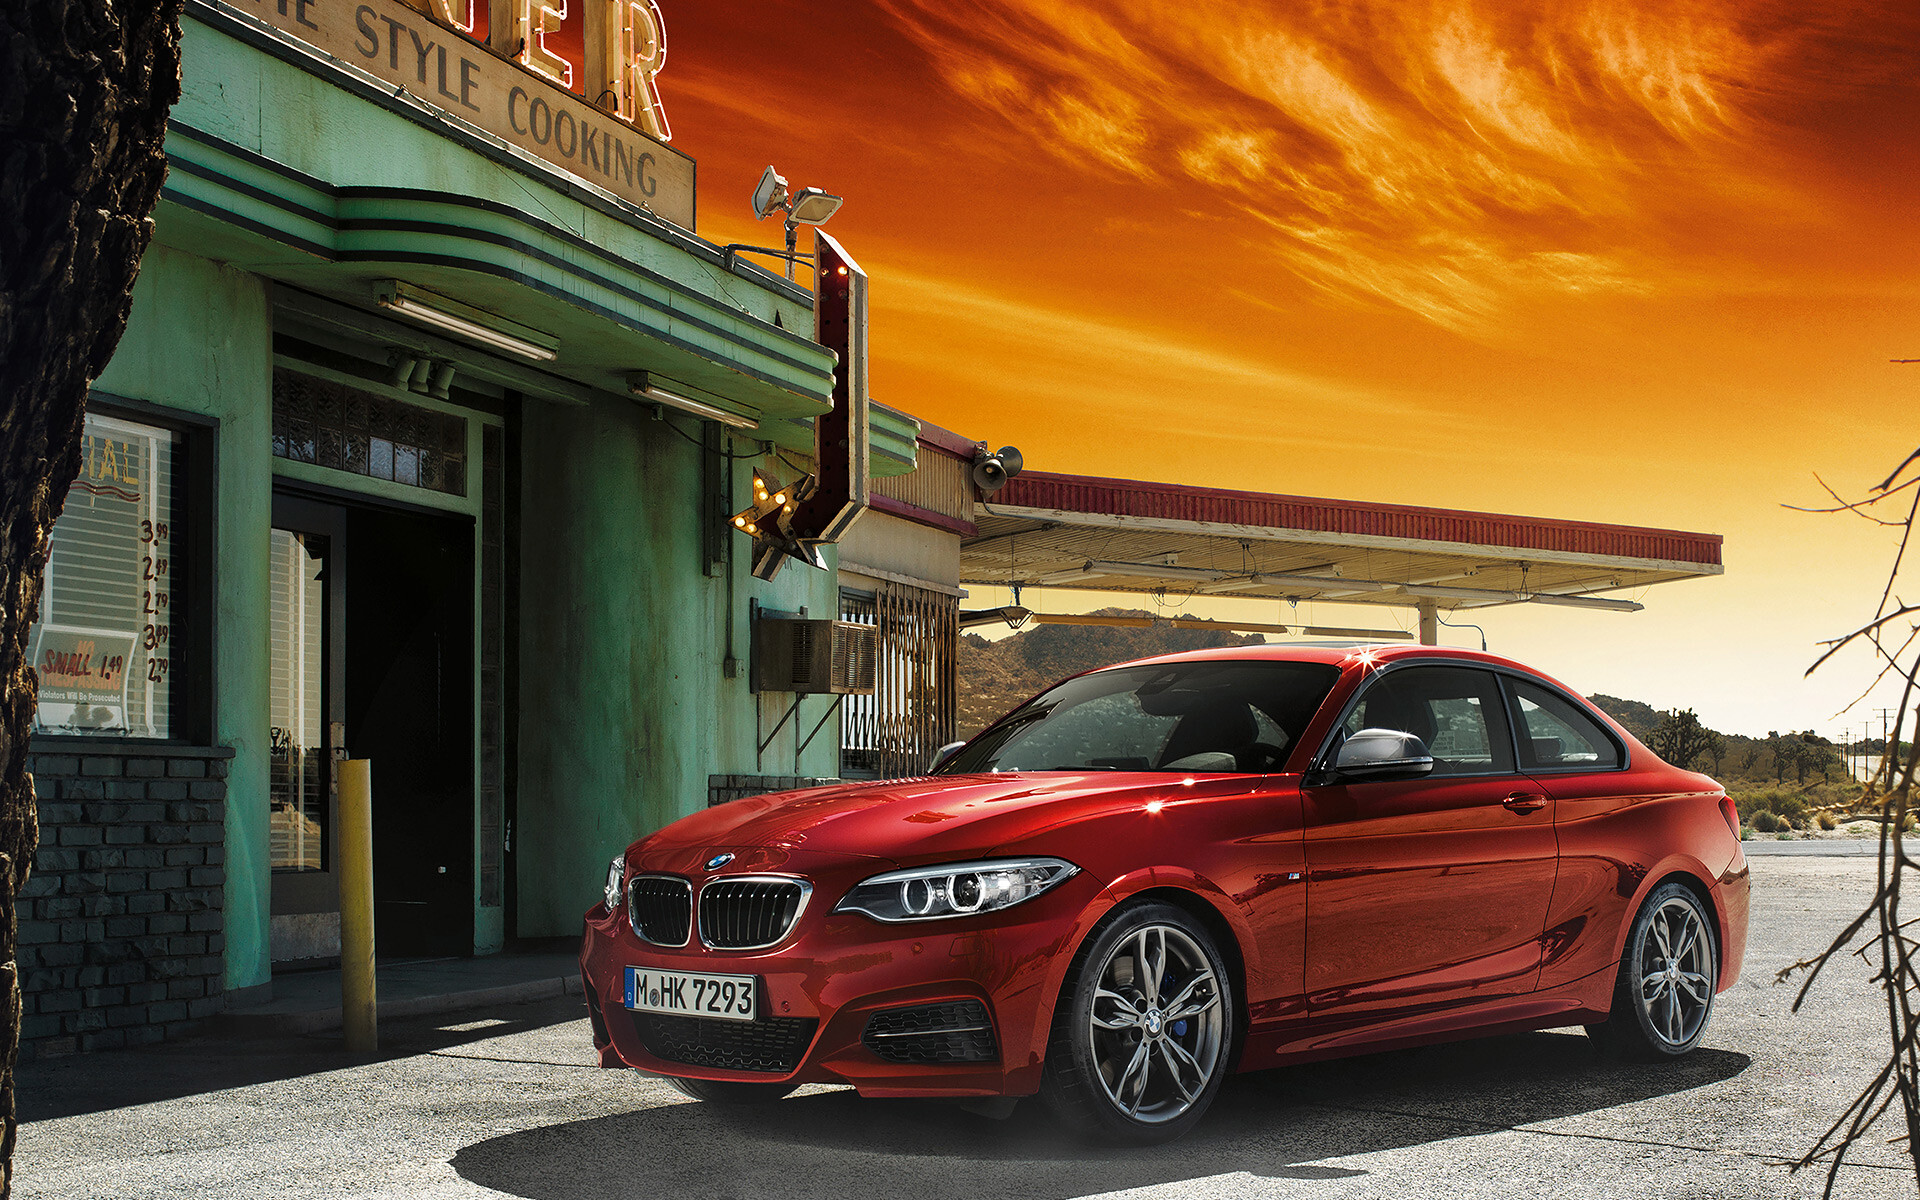 BMW 2 Series: One of the German automobile industry giants, M235i, 2.0-liter TwinPower Turbo engine. 1920x1200 HD Wallpaper.